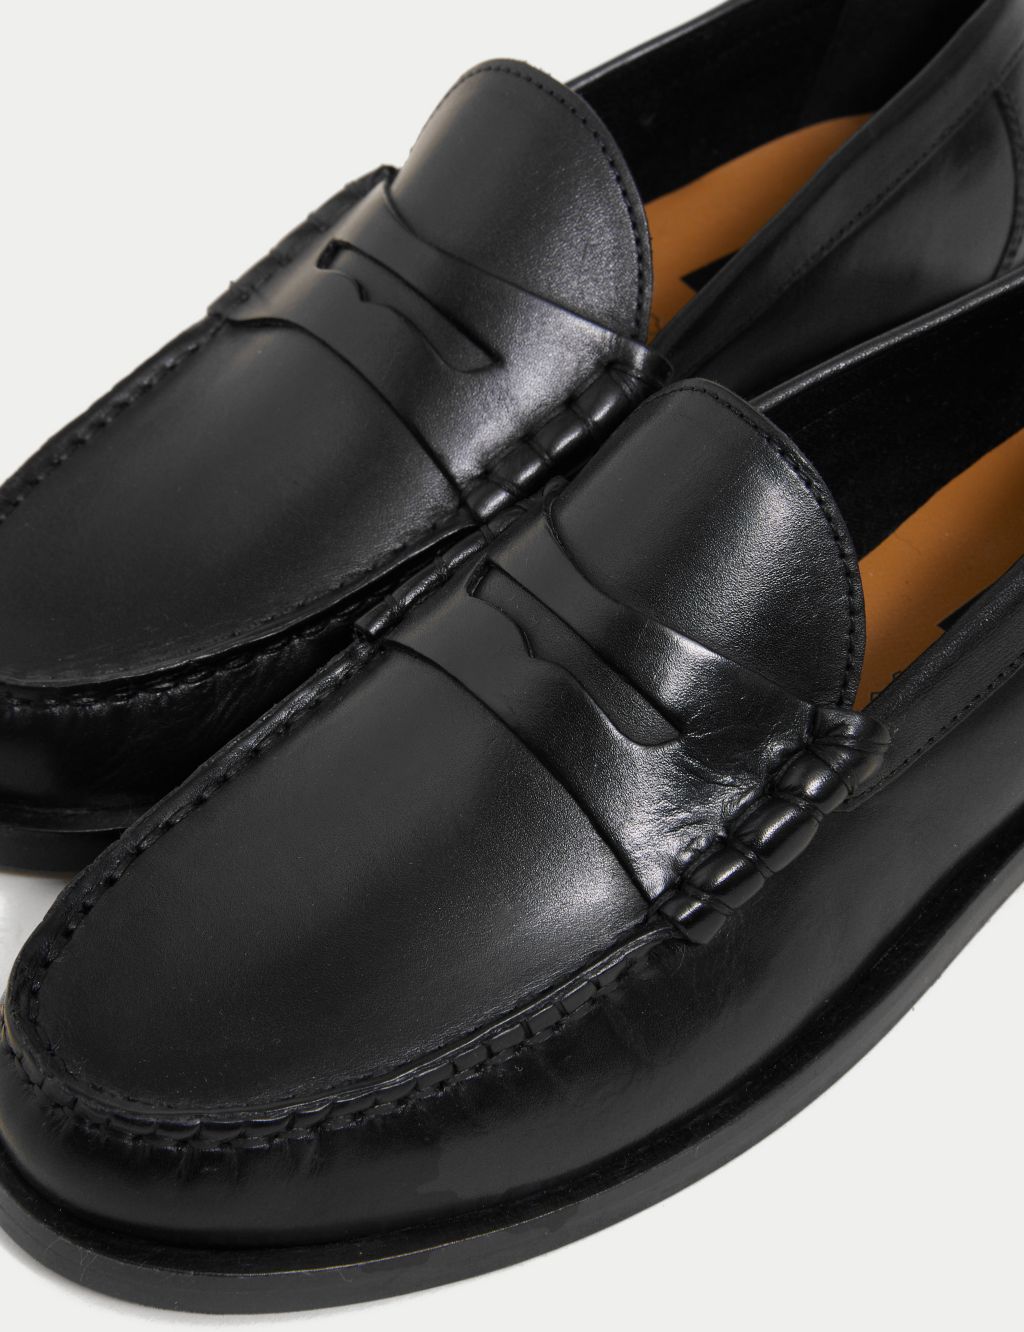 Leather Loafers image 3